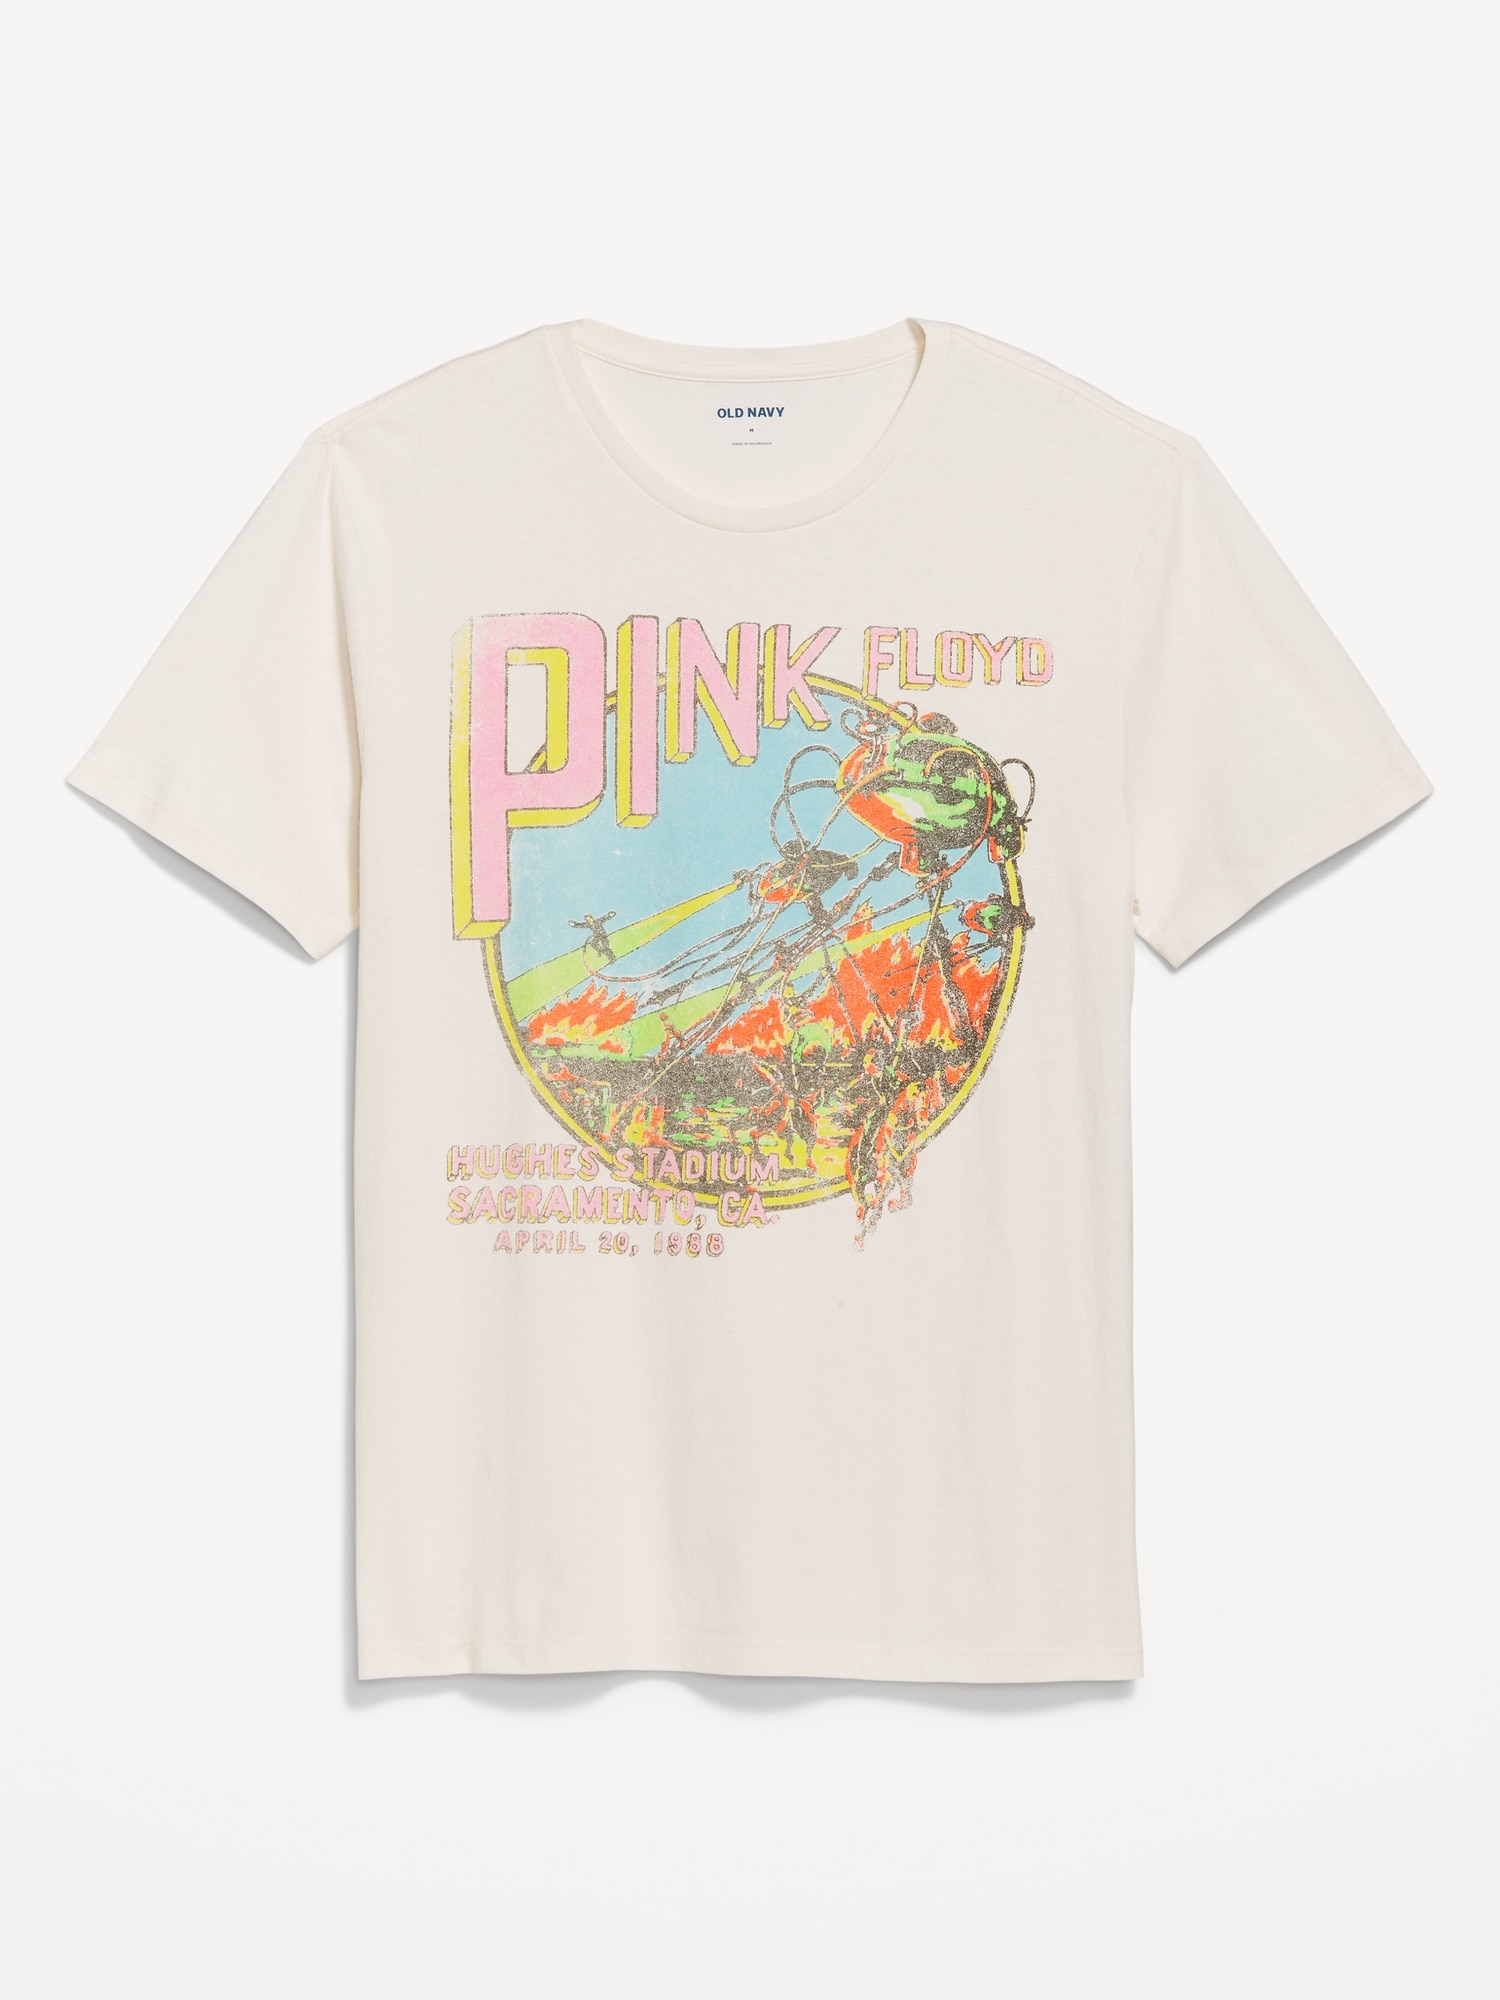 Pink Floyd™ Gender-Neutral T-Shirt for Adults